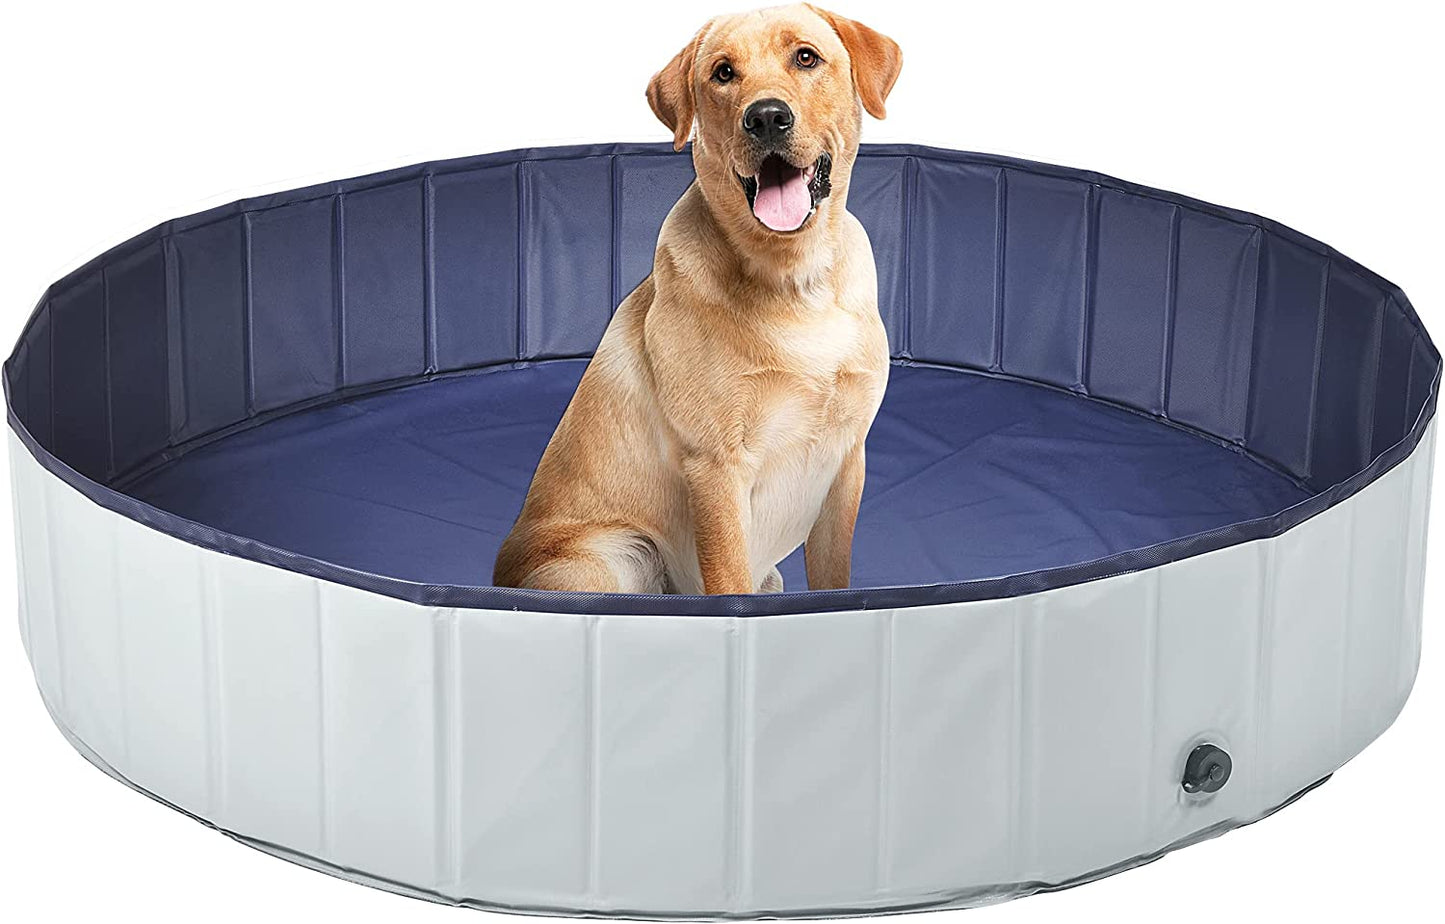 Portable Hard Plastic Pet Bath Pool for Dogs, Collapsible Dog Swimming Pool,31.5 x 8 inches